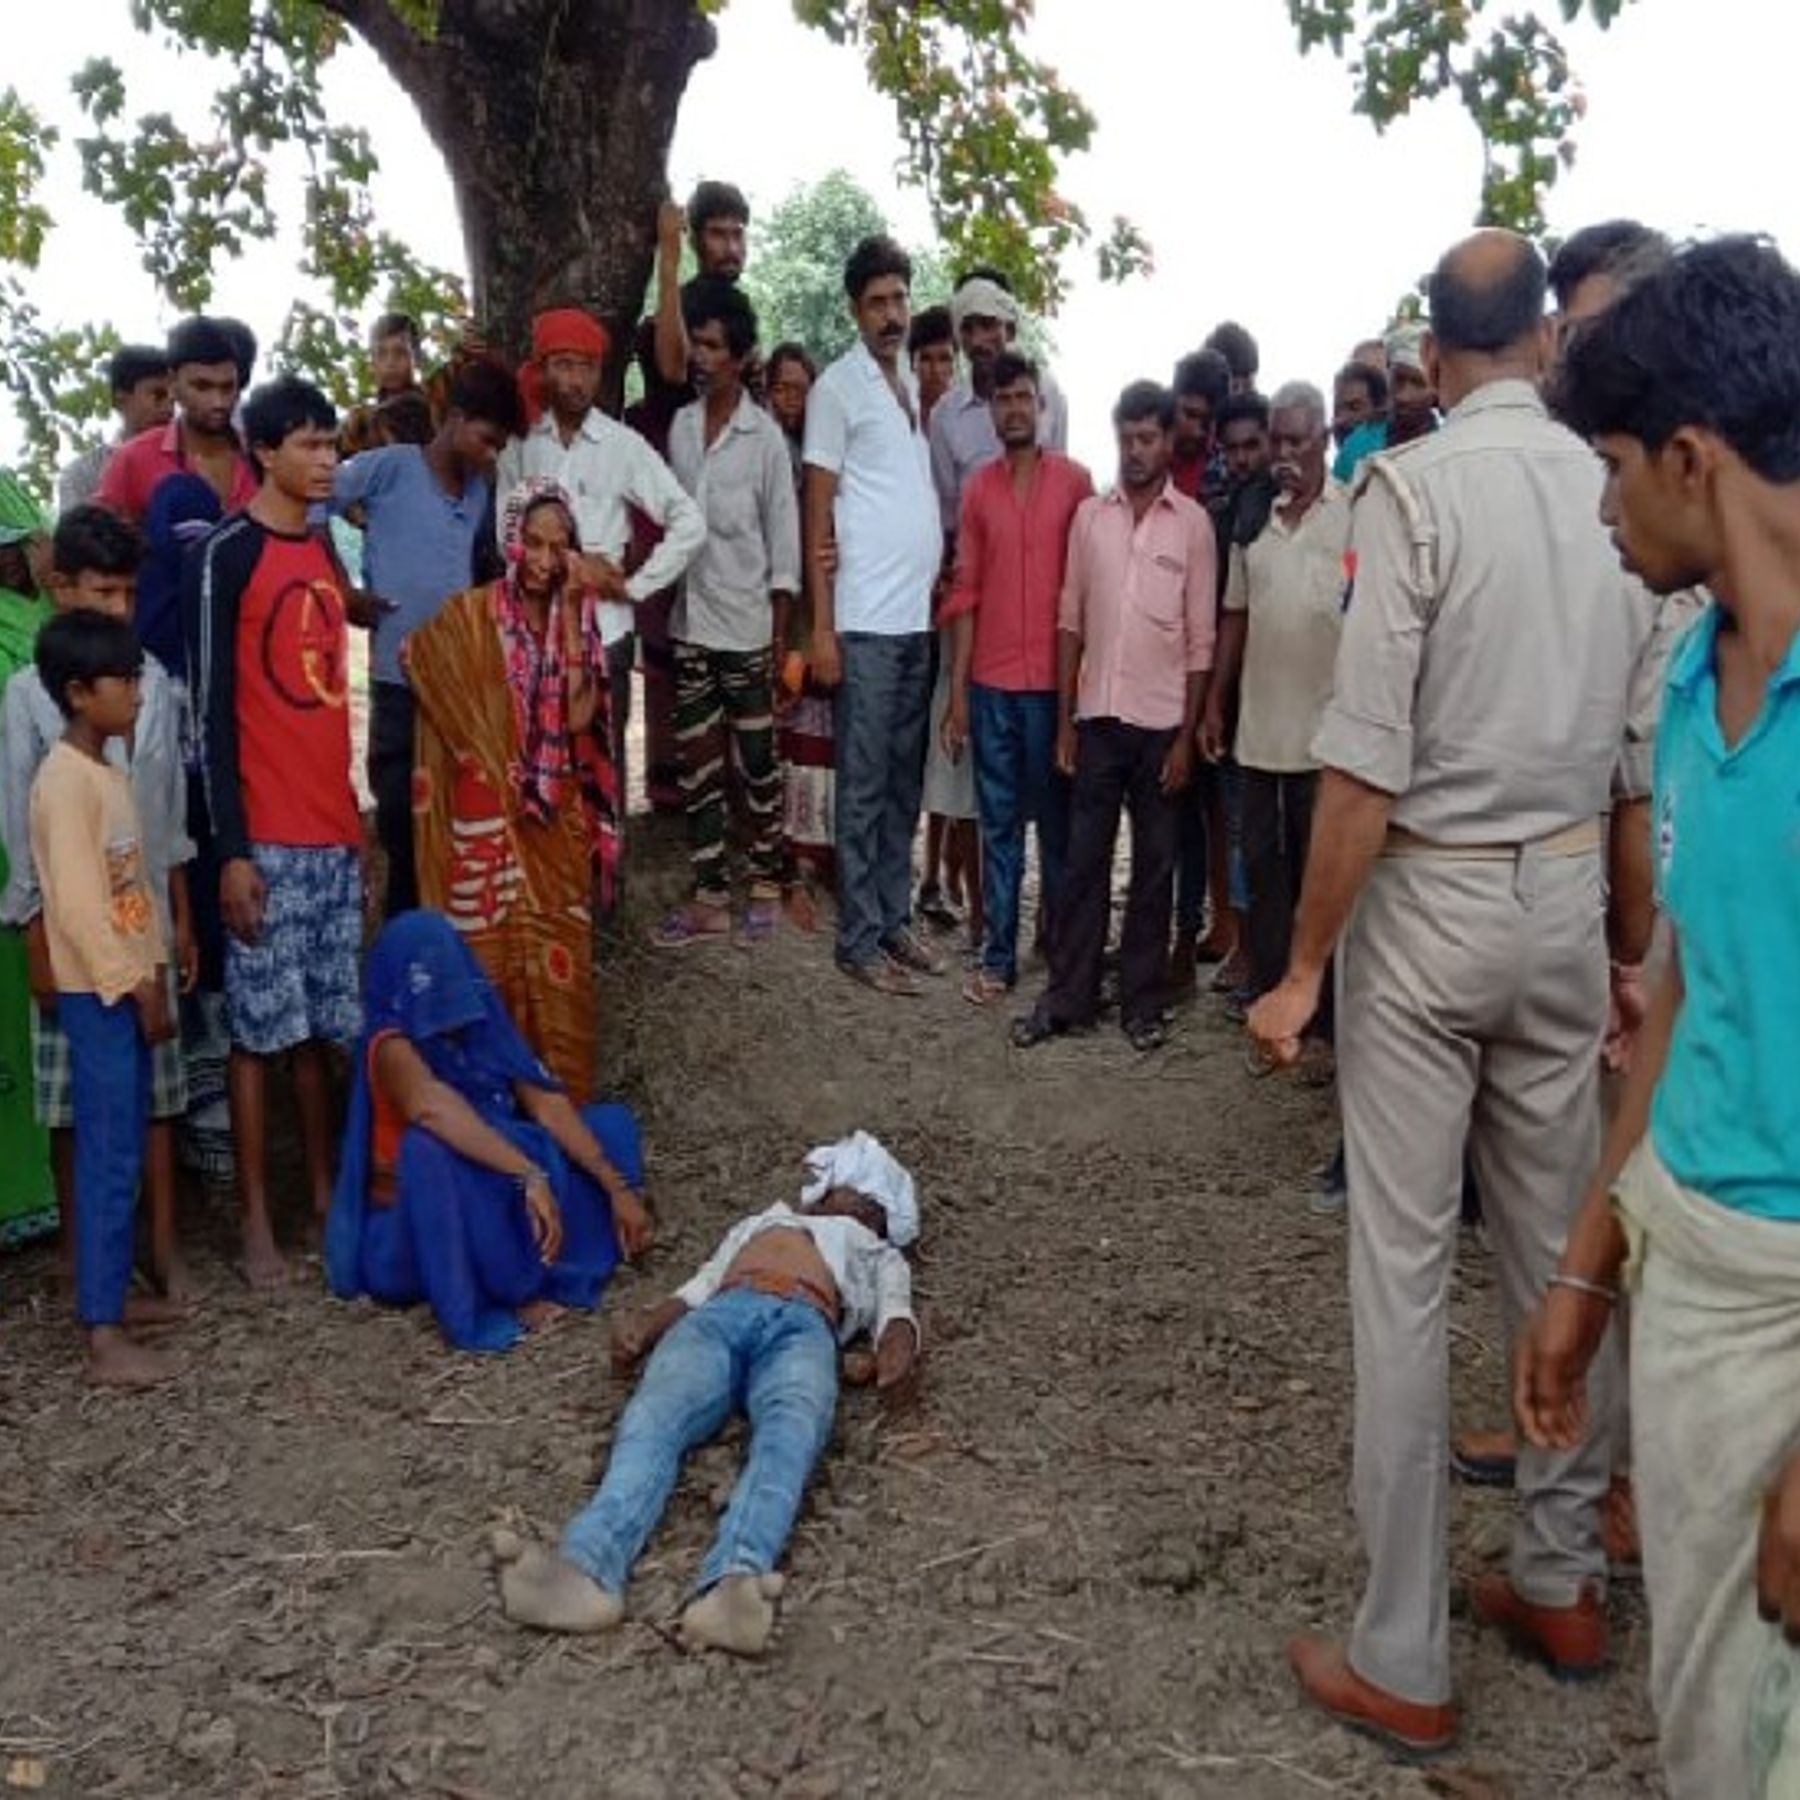 Dead body of a young man found on the road in Patashpur, fear of murder